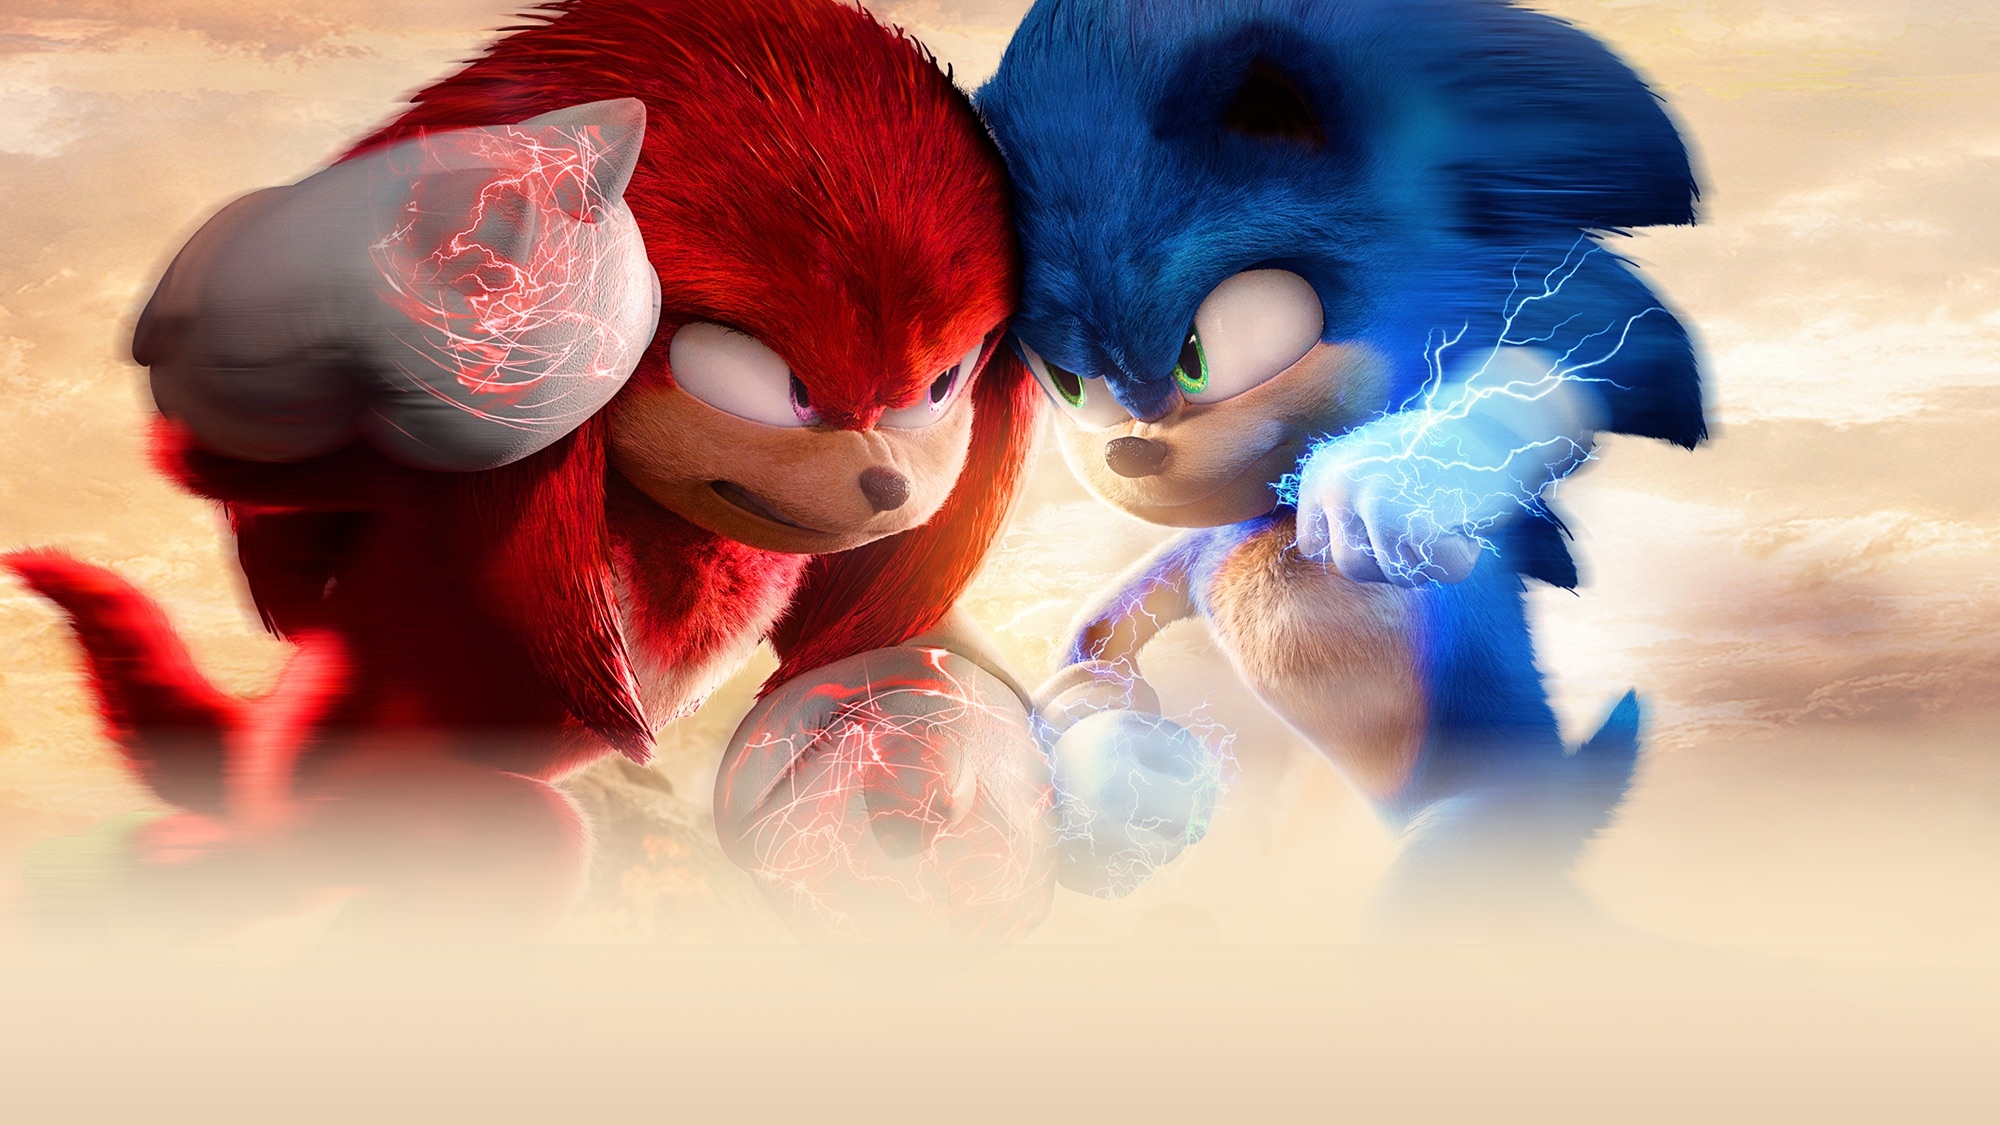 1680x10502019717 Sonic the Hedgehog vs Knuckles the Echidna